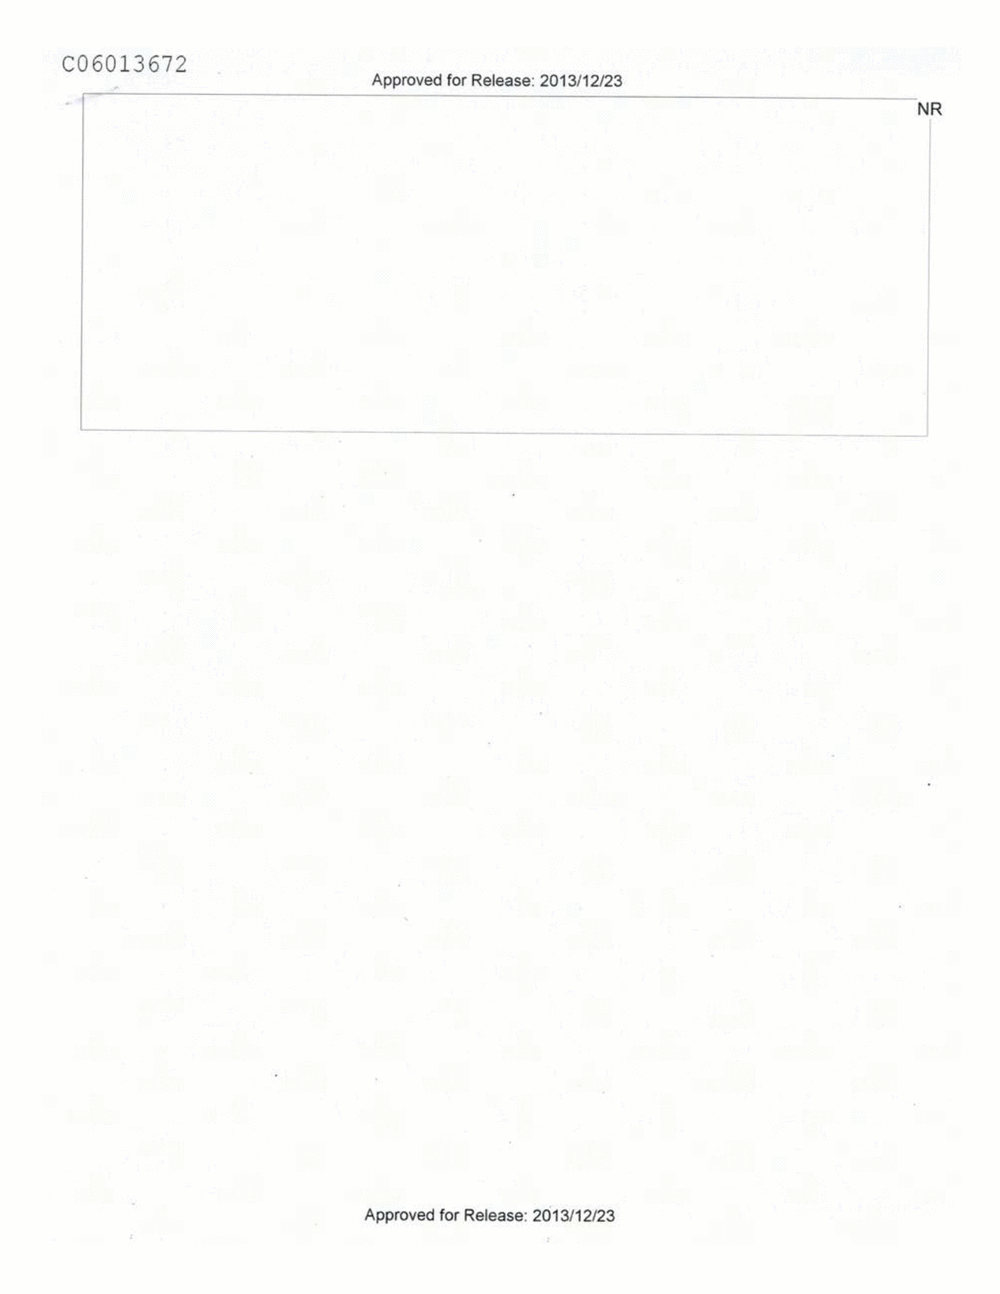 Page 524 from Email Correspondence Between Reporters and CIA Flacks